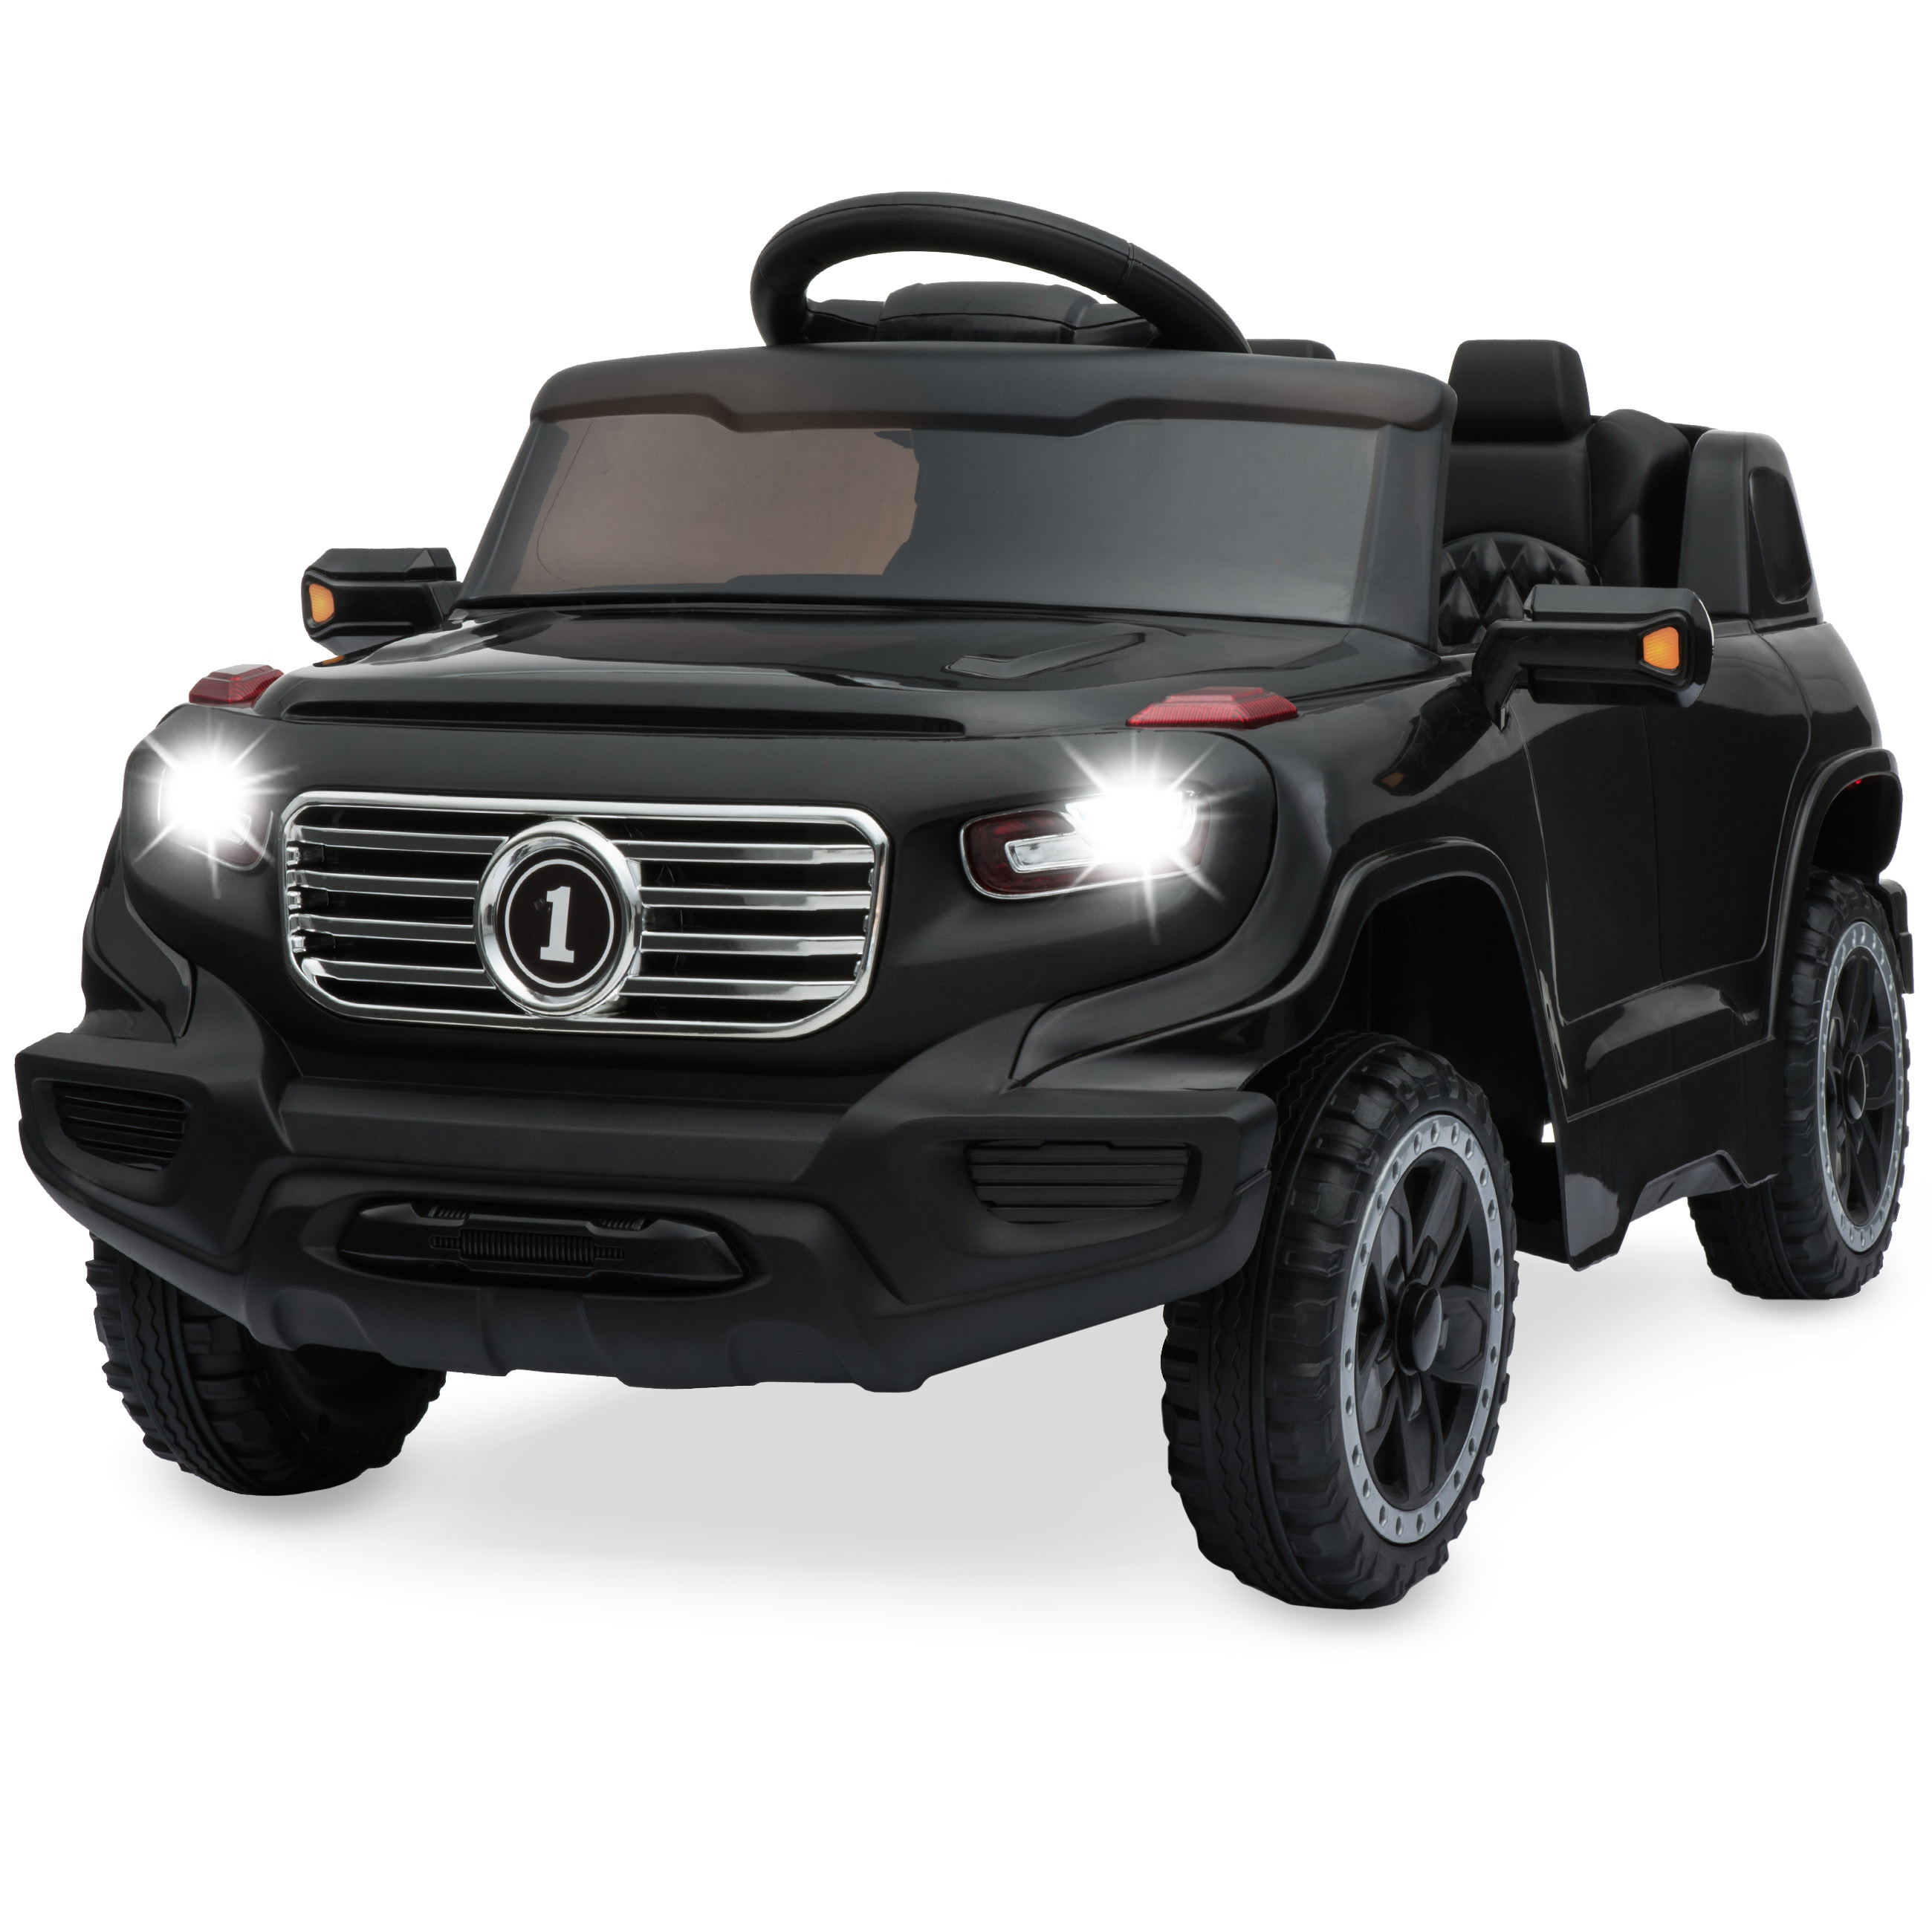 Best Choice Products 6V Kids Ride On Car Truck w/ Parent Control, 3 Speeds, LED Headlights, MP3 Player, Horn - Black - image 1 of 8